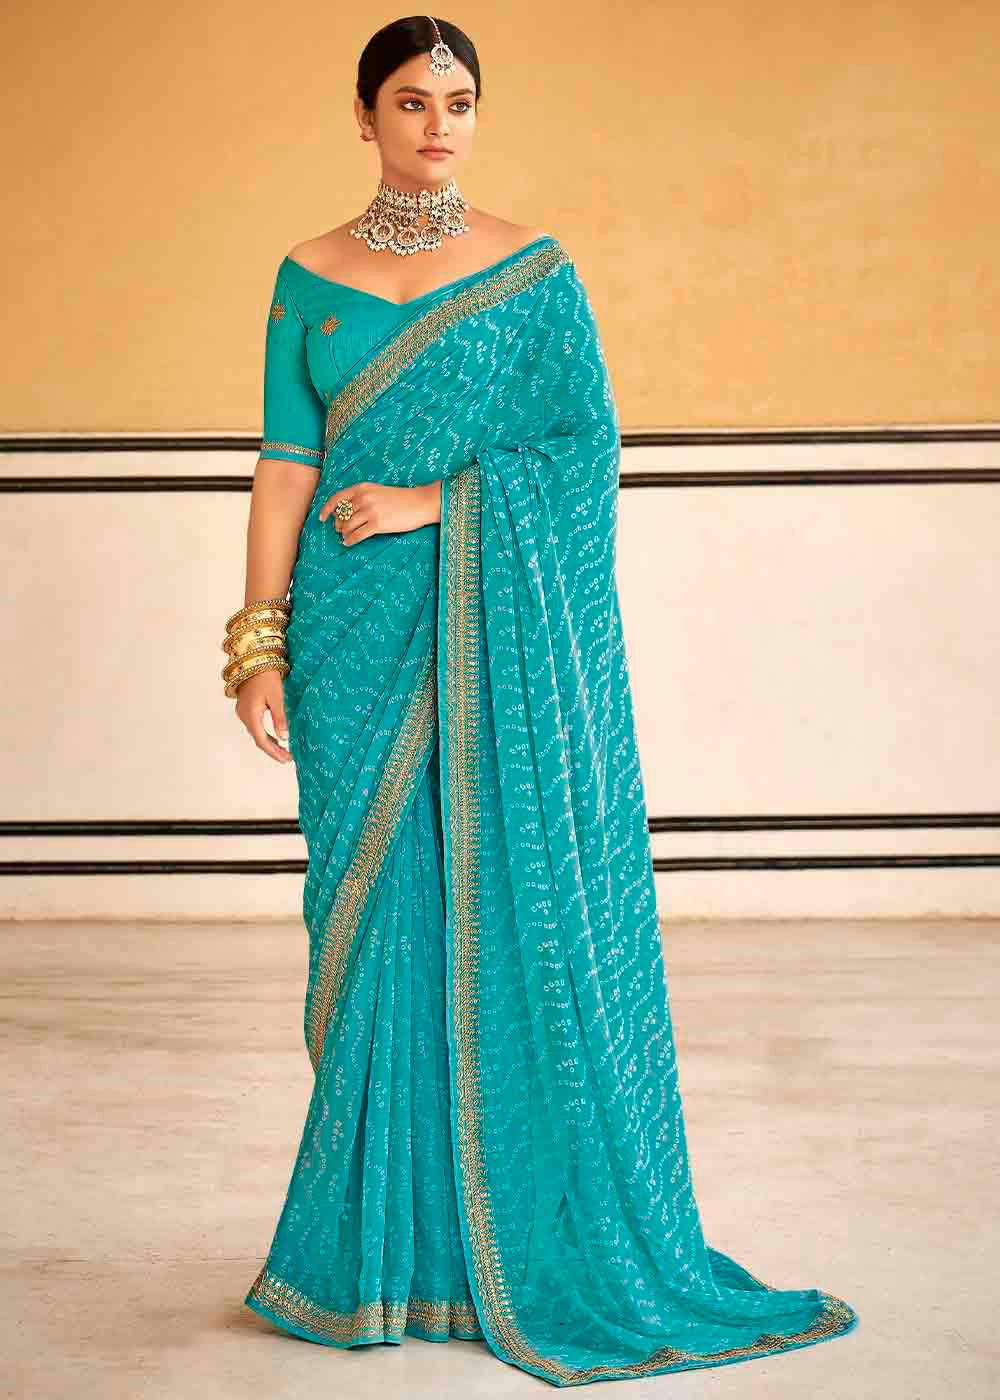 Buy MySilkLove Persian Blue Georgette Leheriya Printed Saree with Embroidered Blouse Online